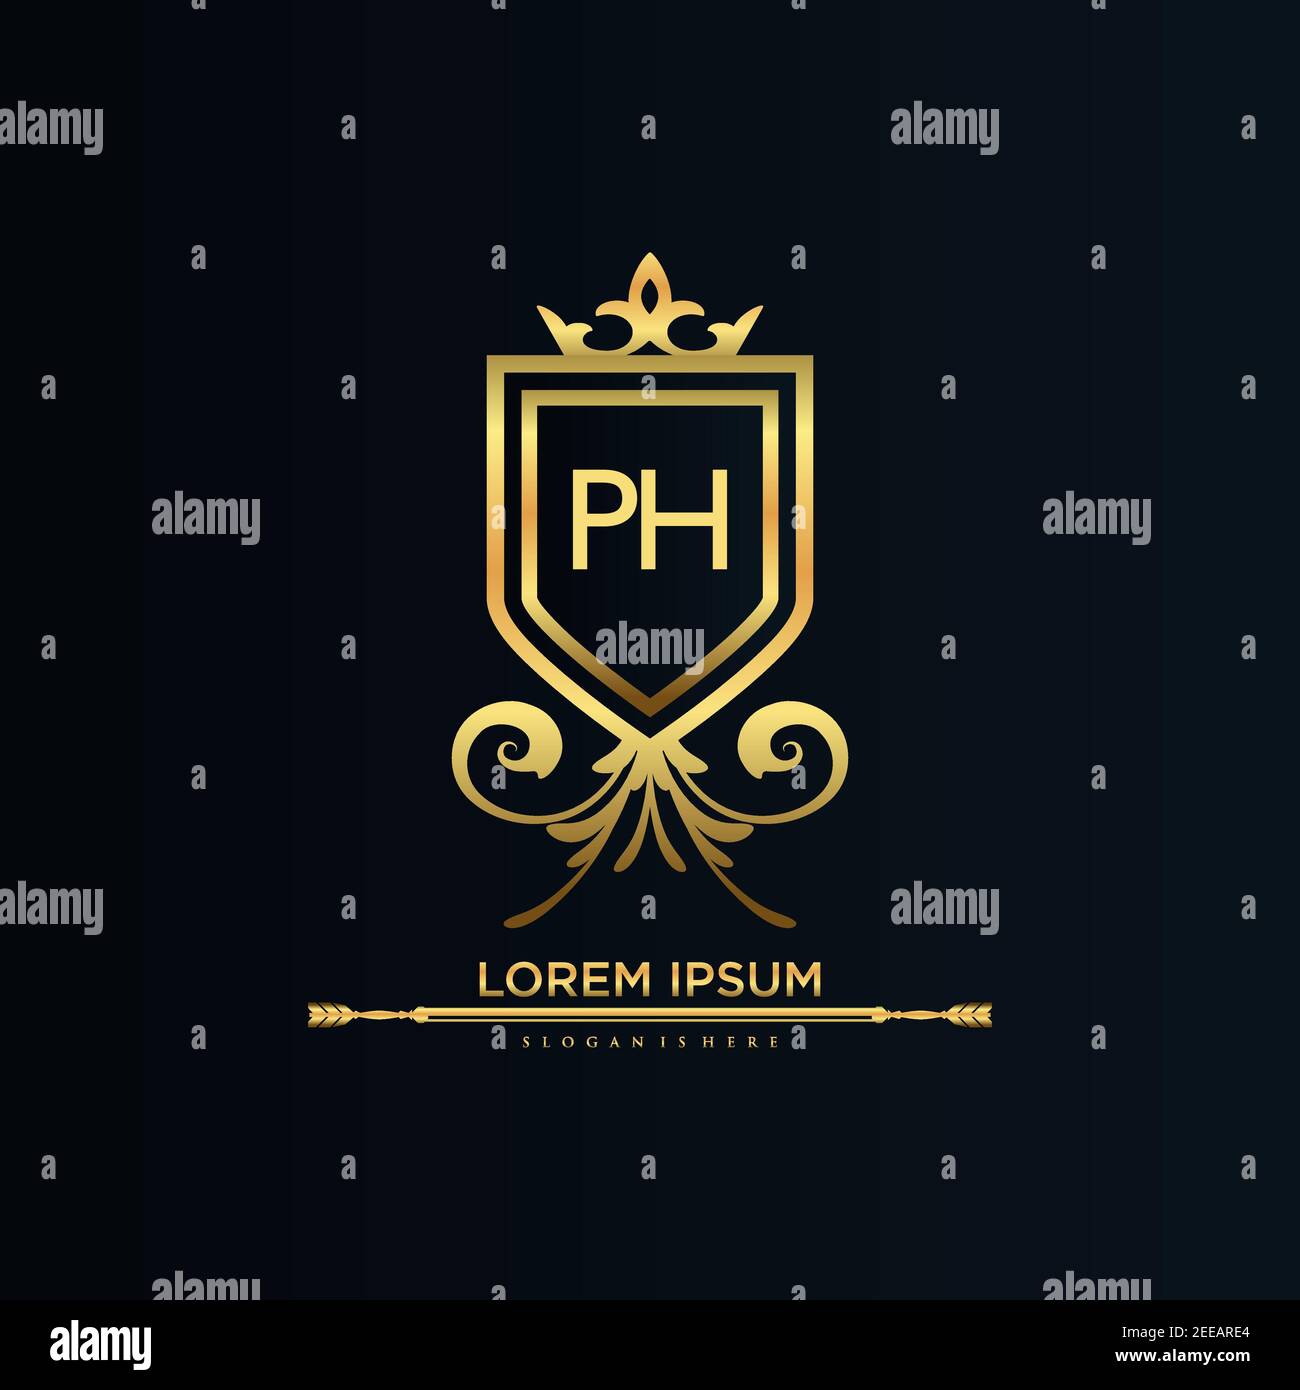 Initial Letter with Royal Template.Elegant with Crown logo vector, Creative lettering Logo Vector Illustration. Illustrazione Vettoriale